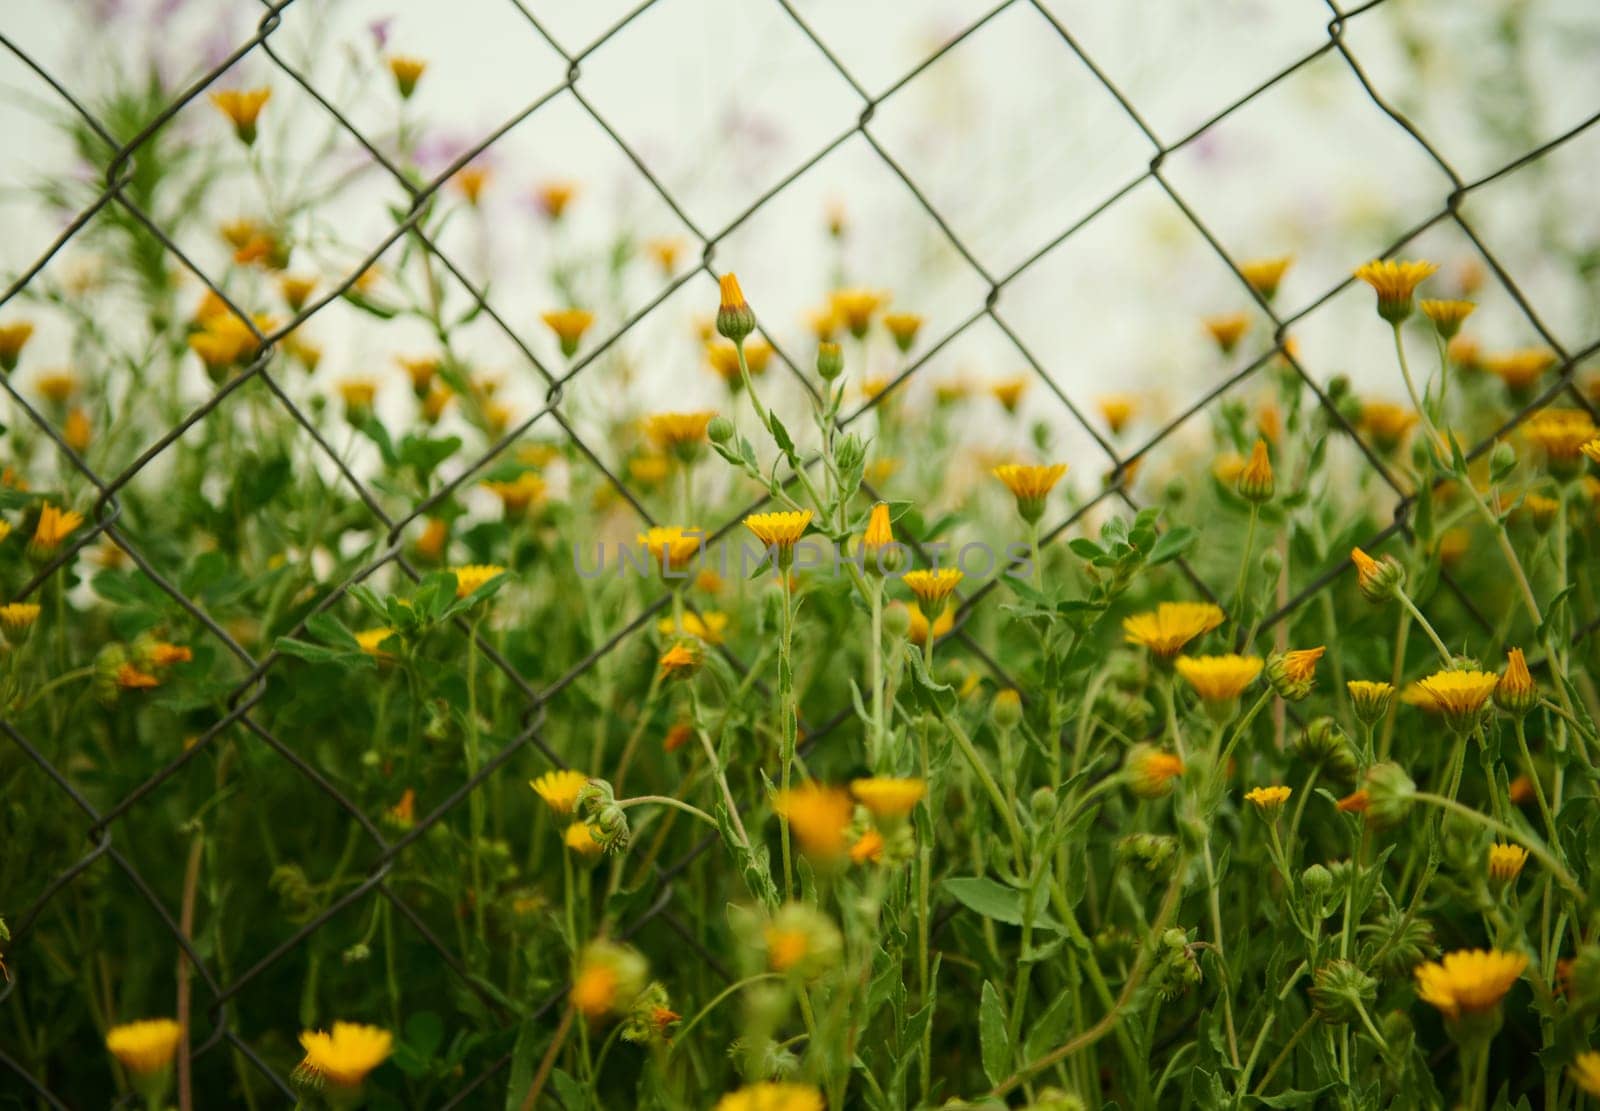 Medicinal calendula flowers growing in the field in the meadow in mountains over metal fence background. Nature backdrop by artgf